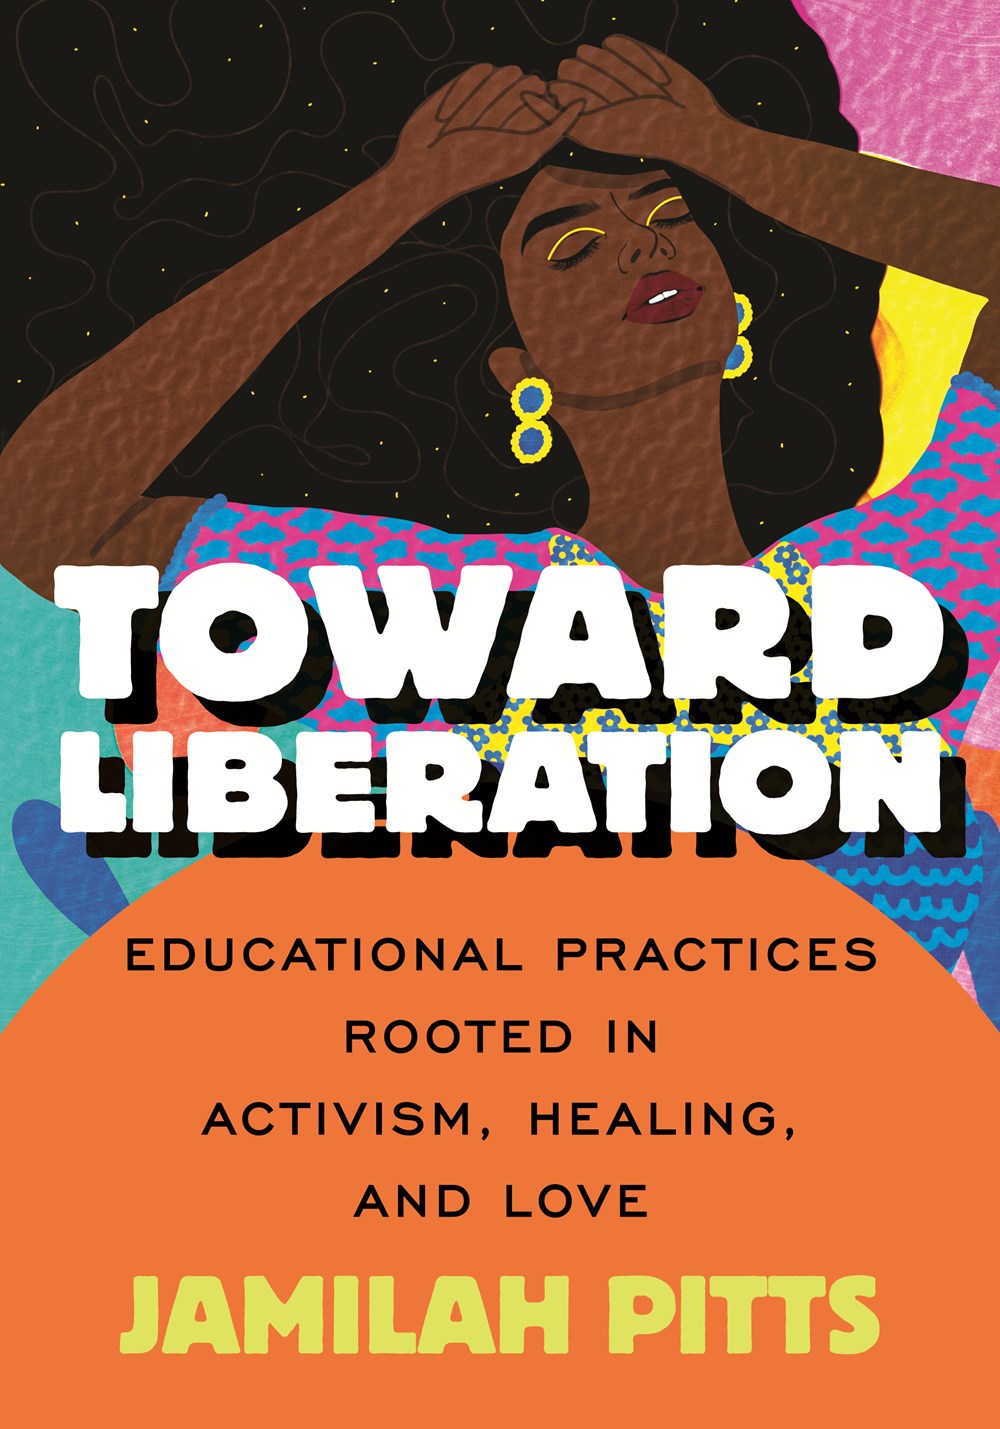 PRE-ORDER: Toward Liberation: Educational Practices Rooted in Activism, Healing and Love